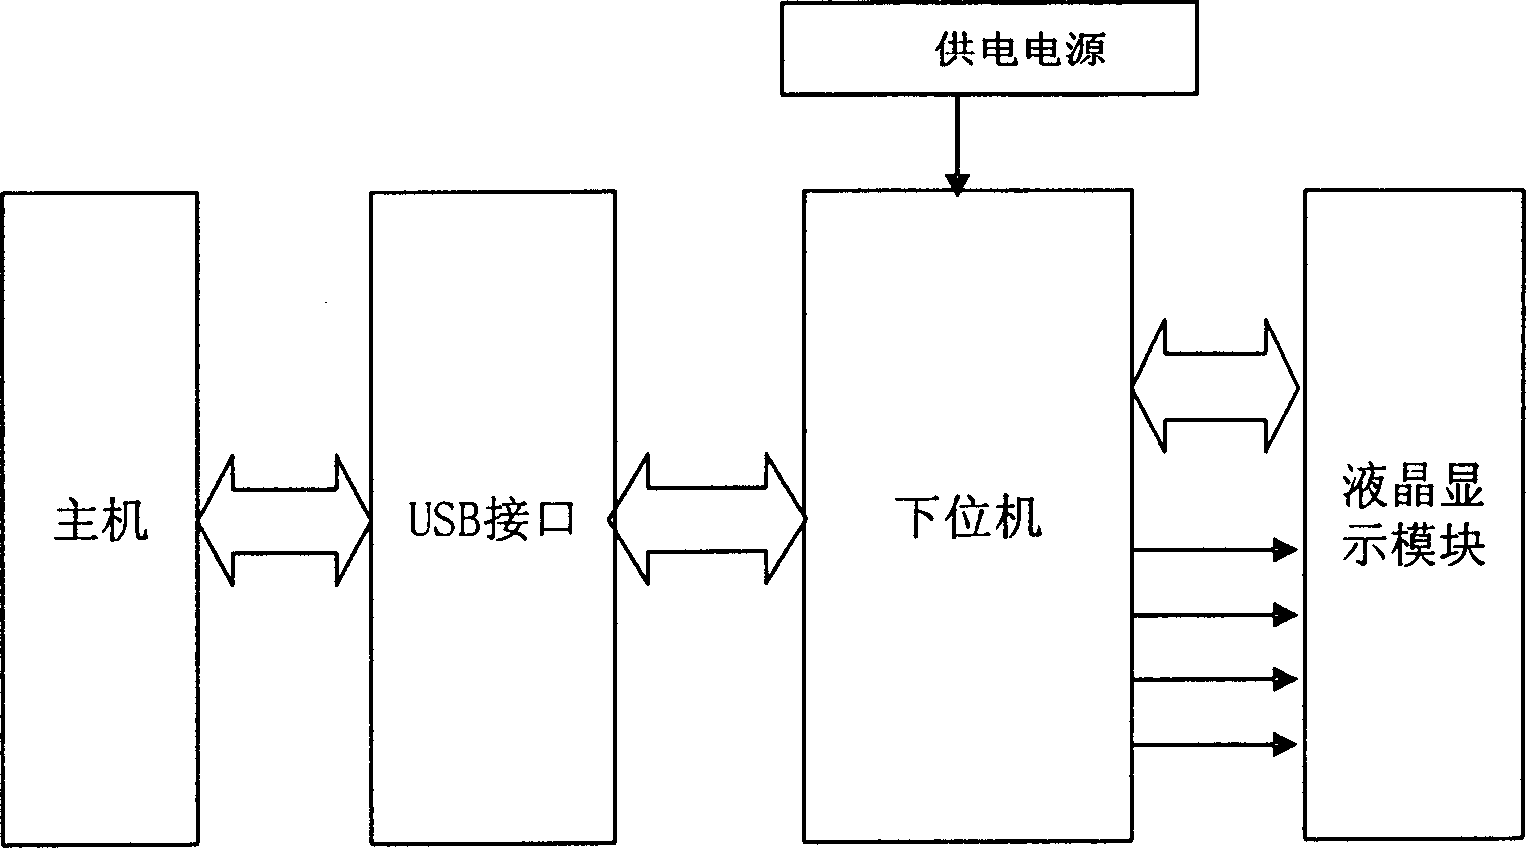 Micro computer auciliary display device and information display method